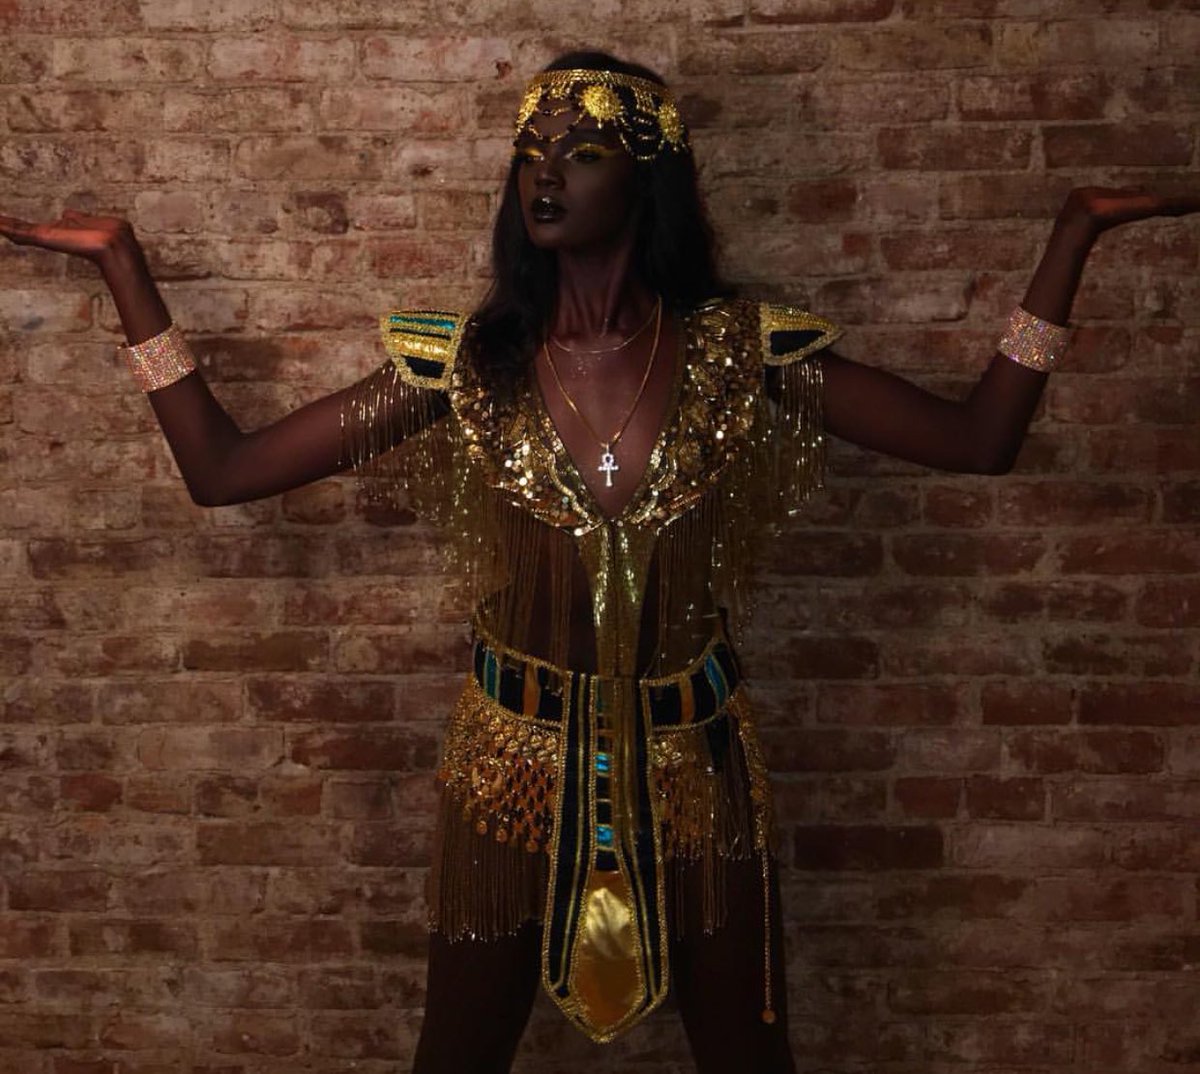 Duckie Thot as Cleopatra